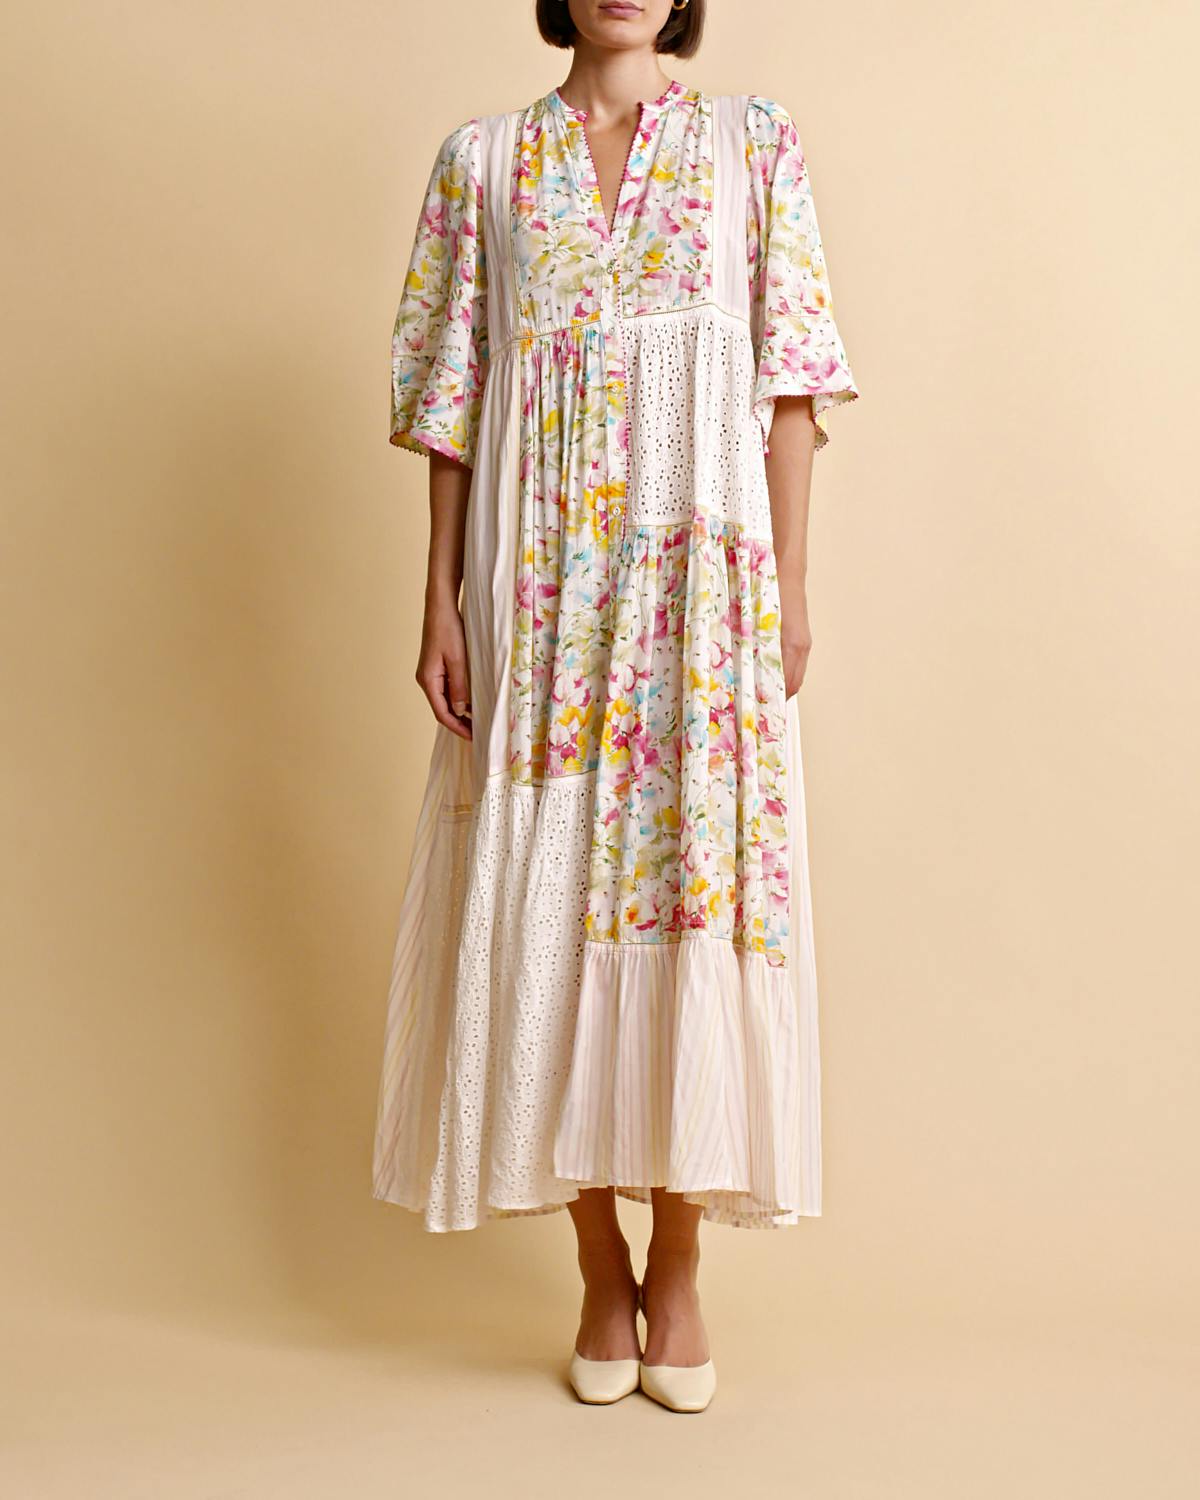 Patchwork Maxi Dress, Bright Flowers. Image #1